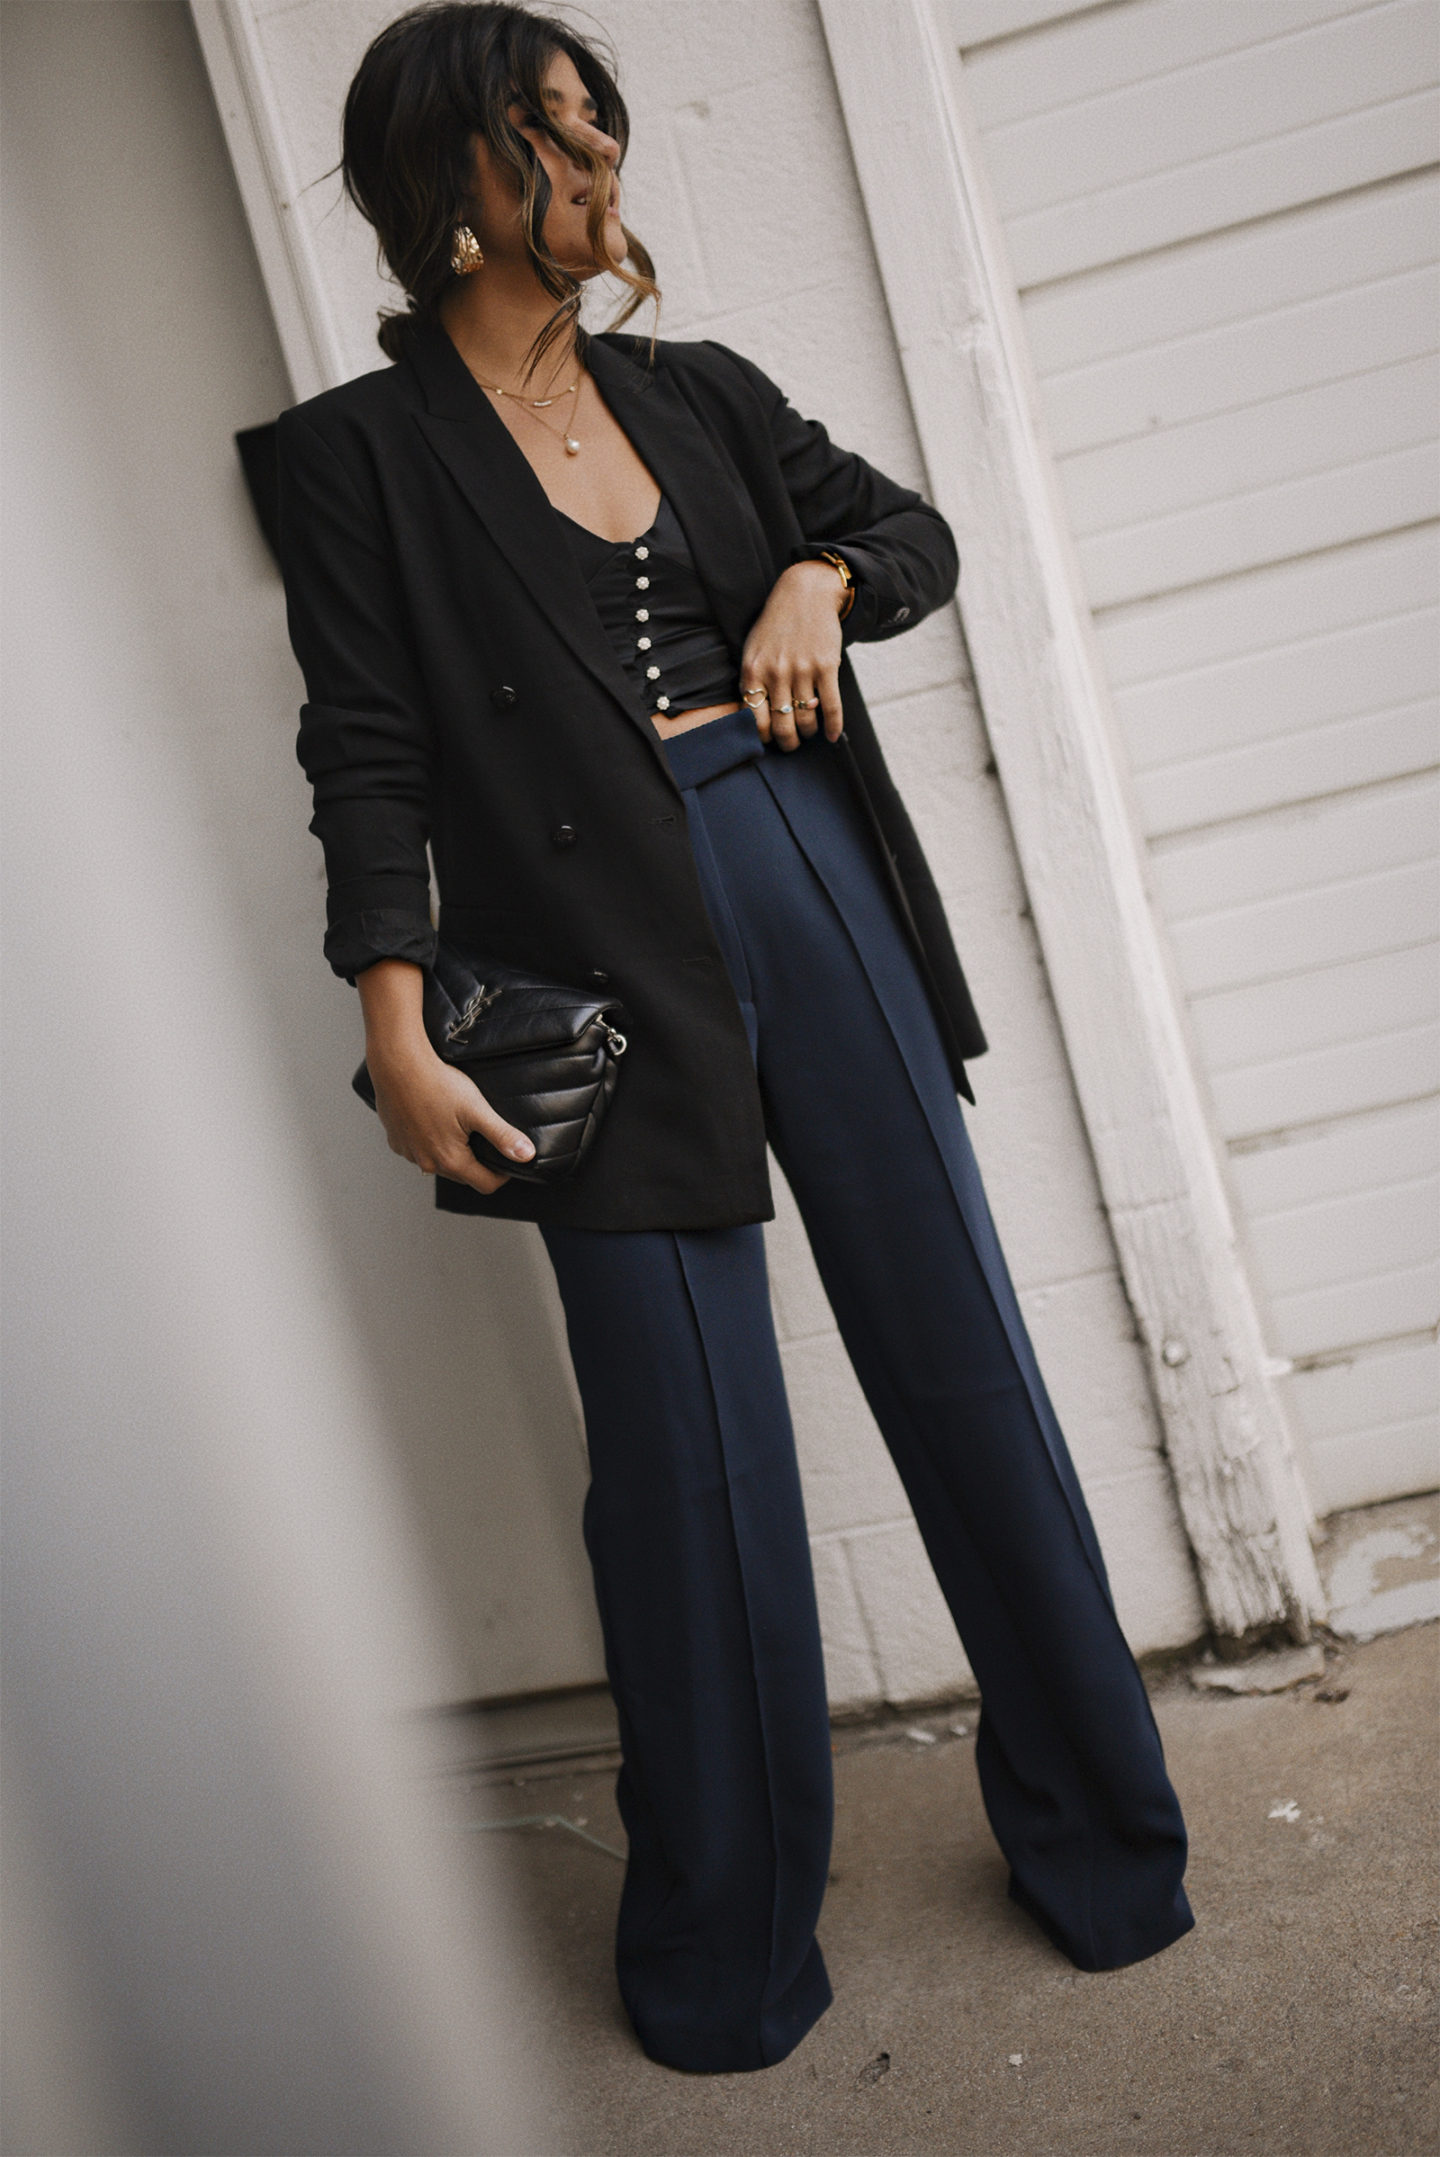 A CHIC WAY TO STYLE BLACK AND NAVY BLUE TOGETHER | CHIC TALK | CHIC TALK